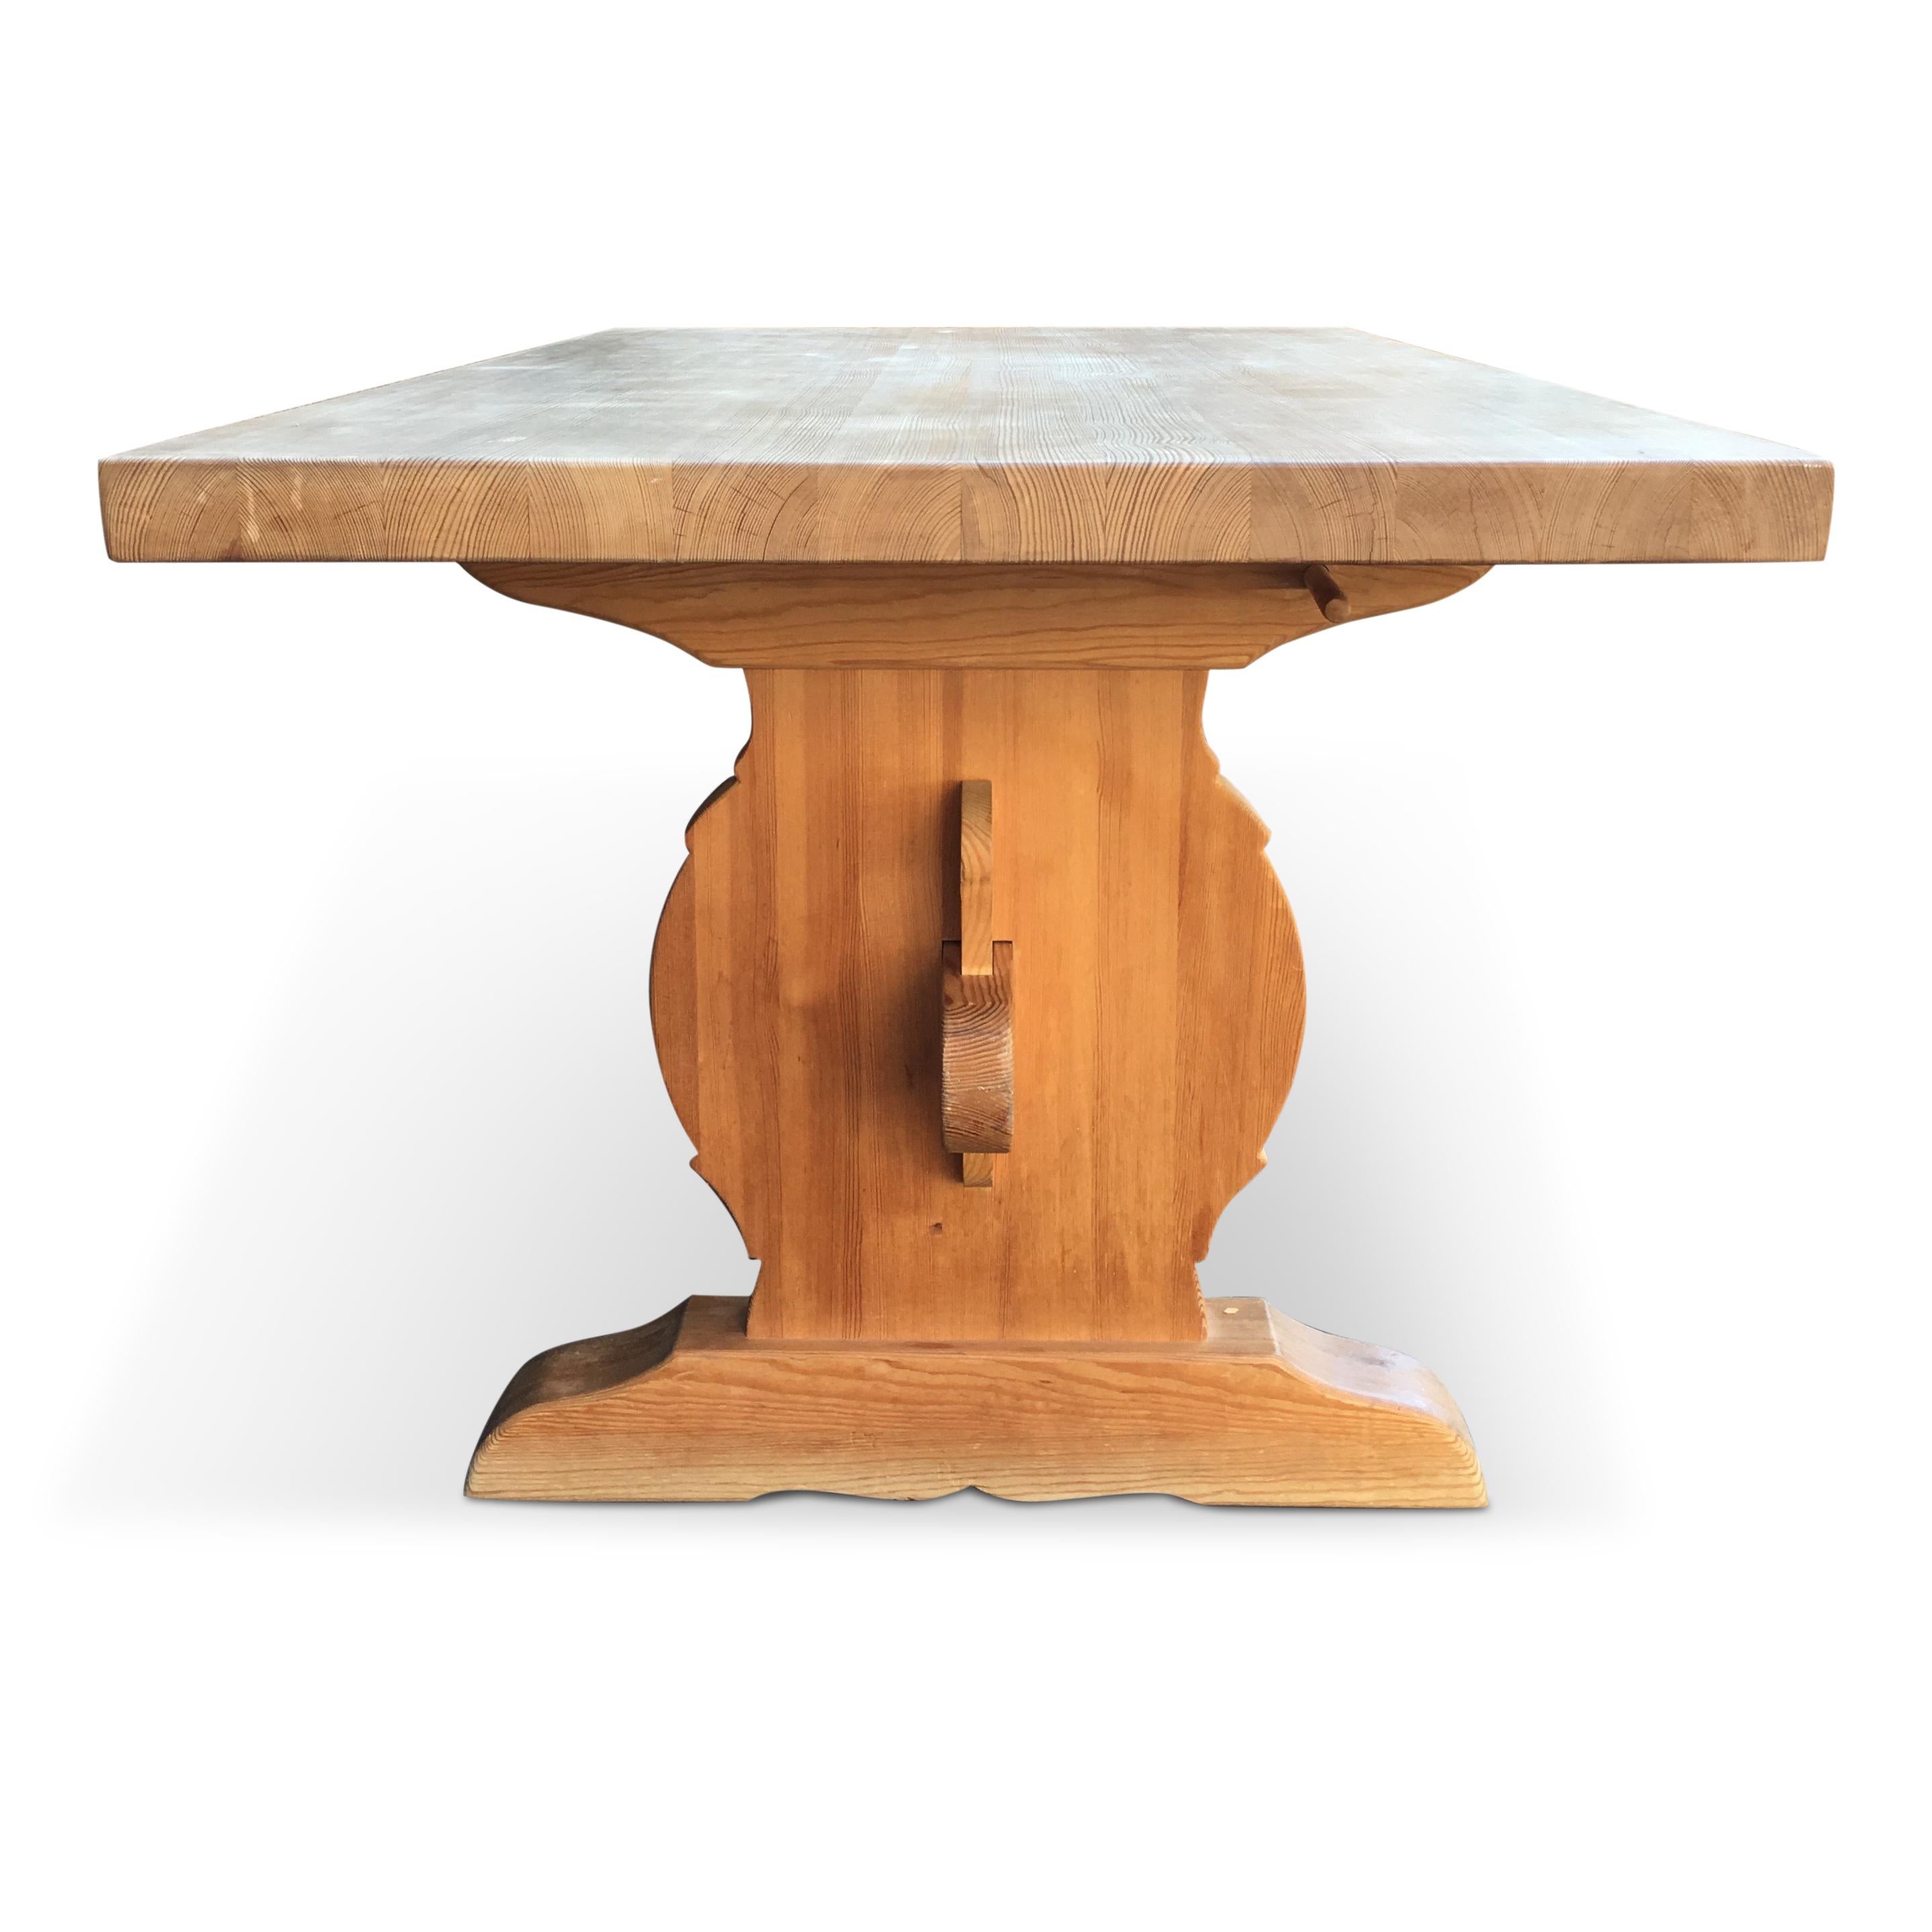 Rustic Midcentury Swedish Trestle Pine Dining Table For Sale